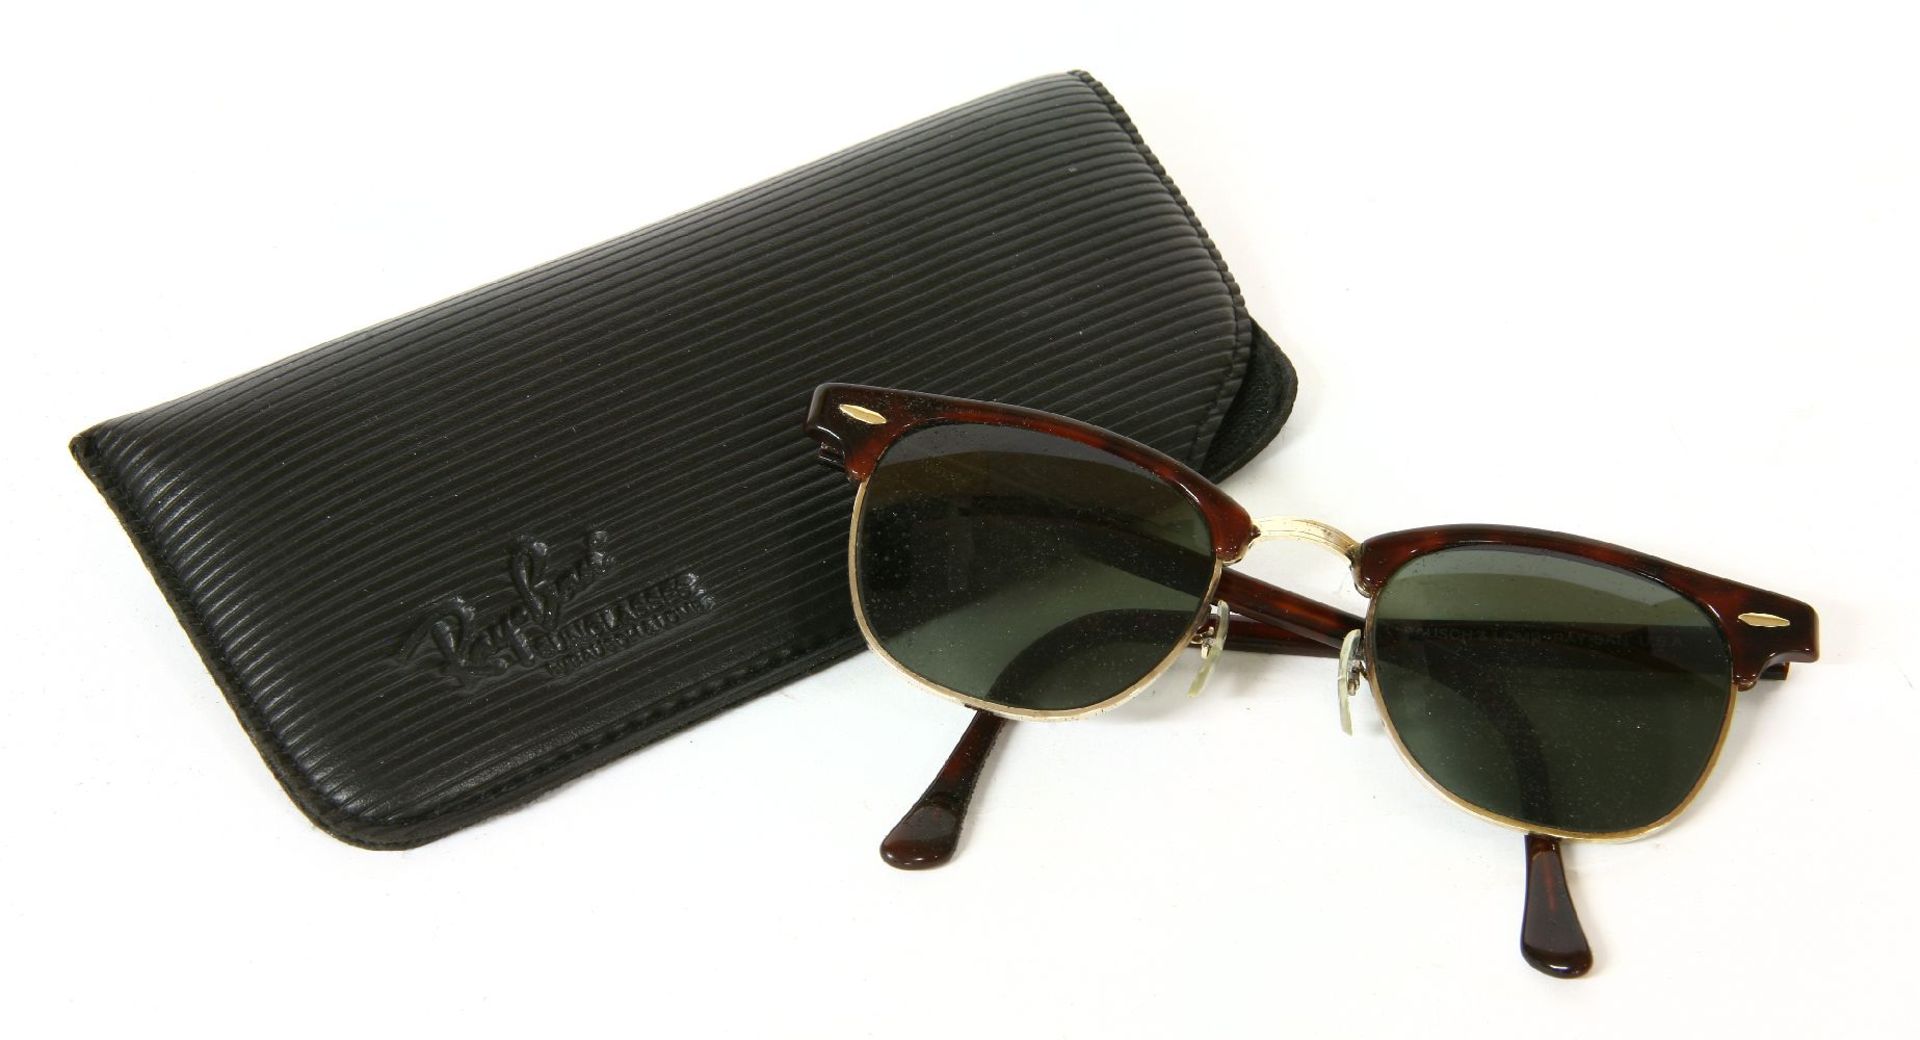 A pair of vintage Ray-Ban 'Clubmaster' sunglasses,by Bausch & Lamb USA, c.1989, tortoiseshell and